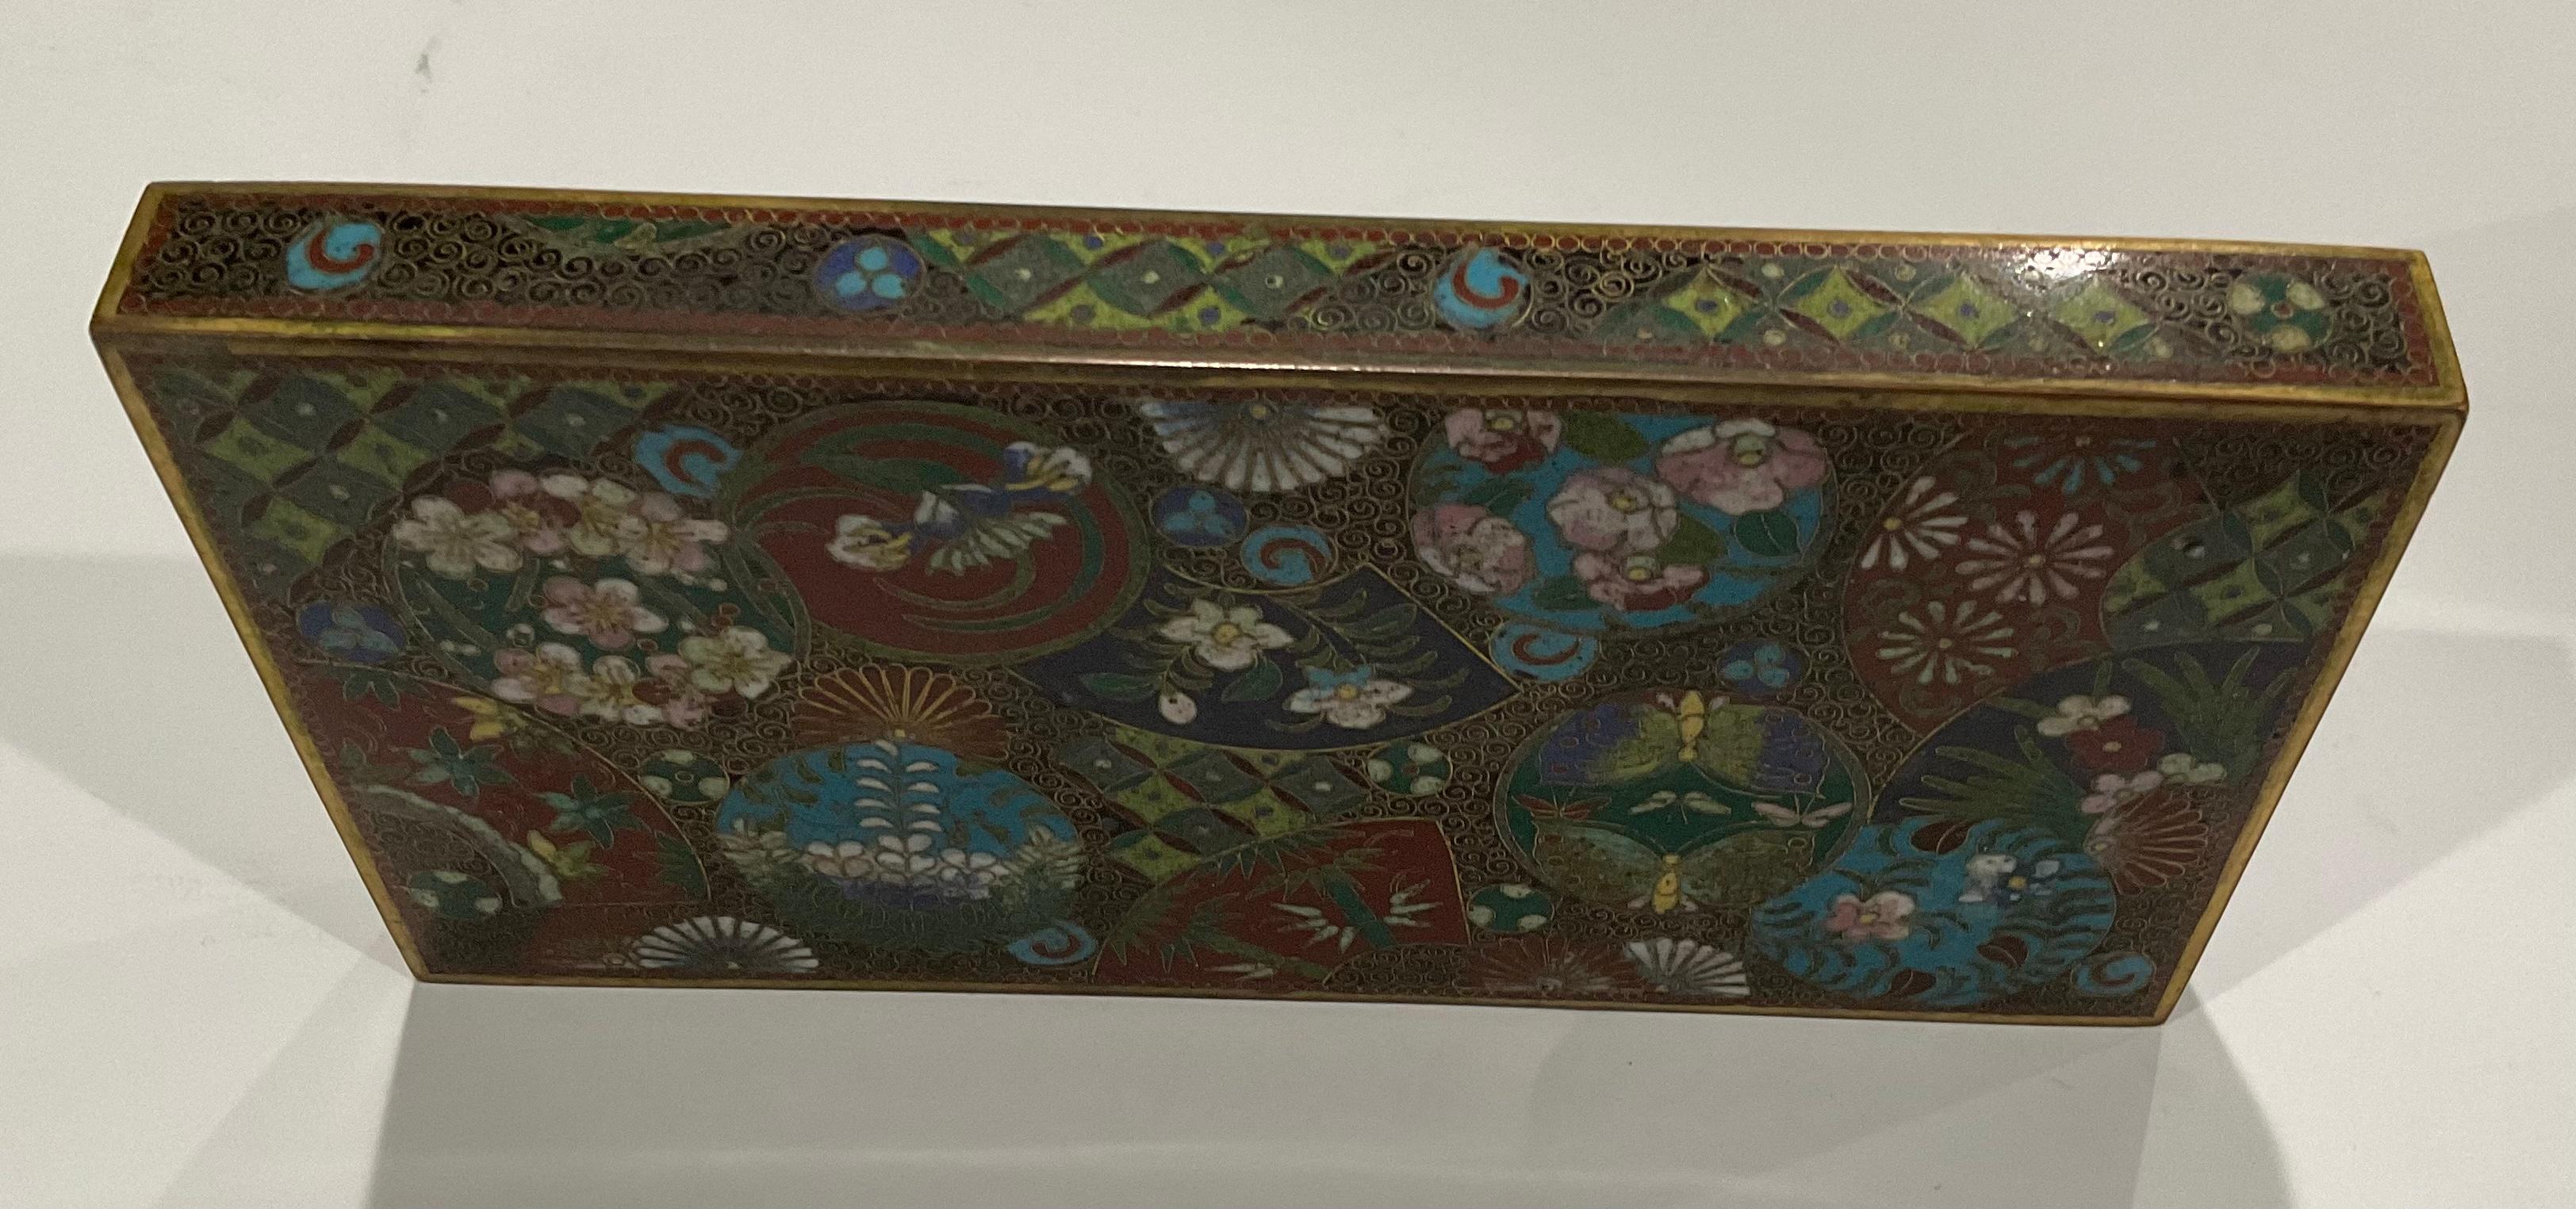 Japanese Cloisonne Detailed Antique Decorative Box Incredible Colors Design  In Good Condition For Sale In Ann Arbor, MI